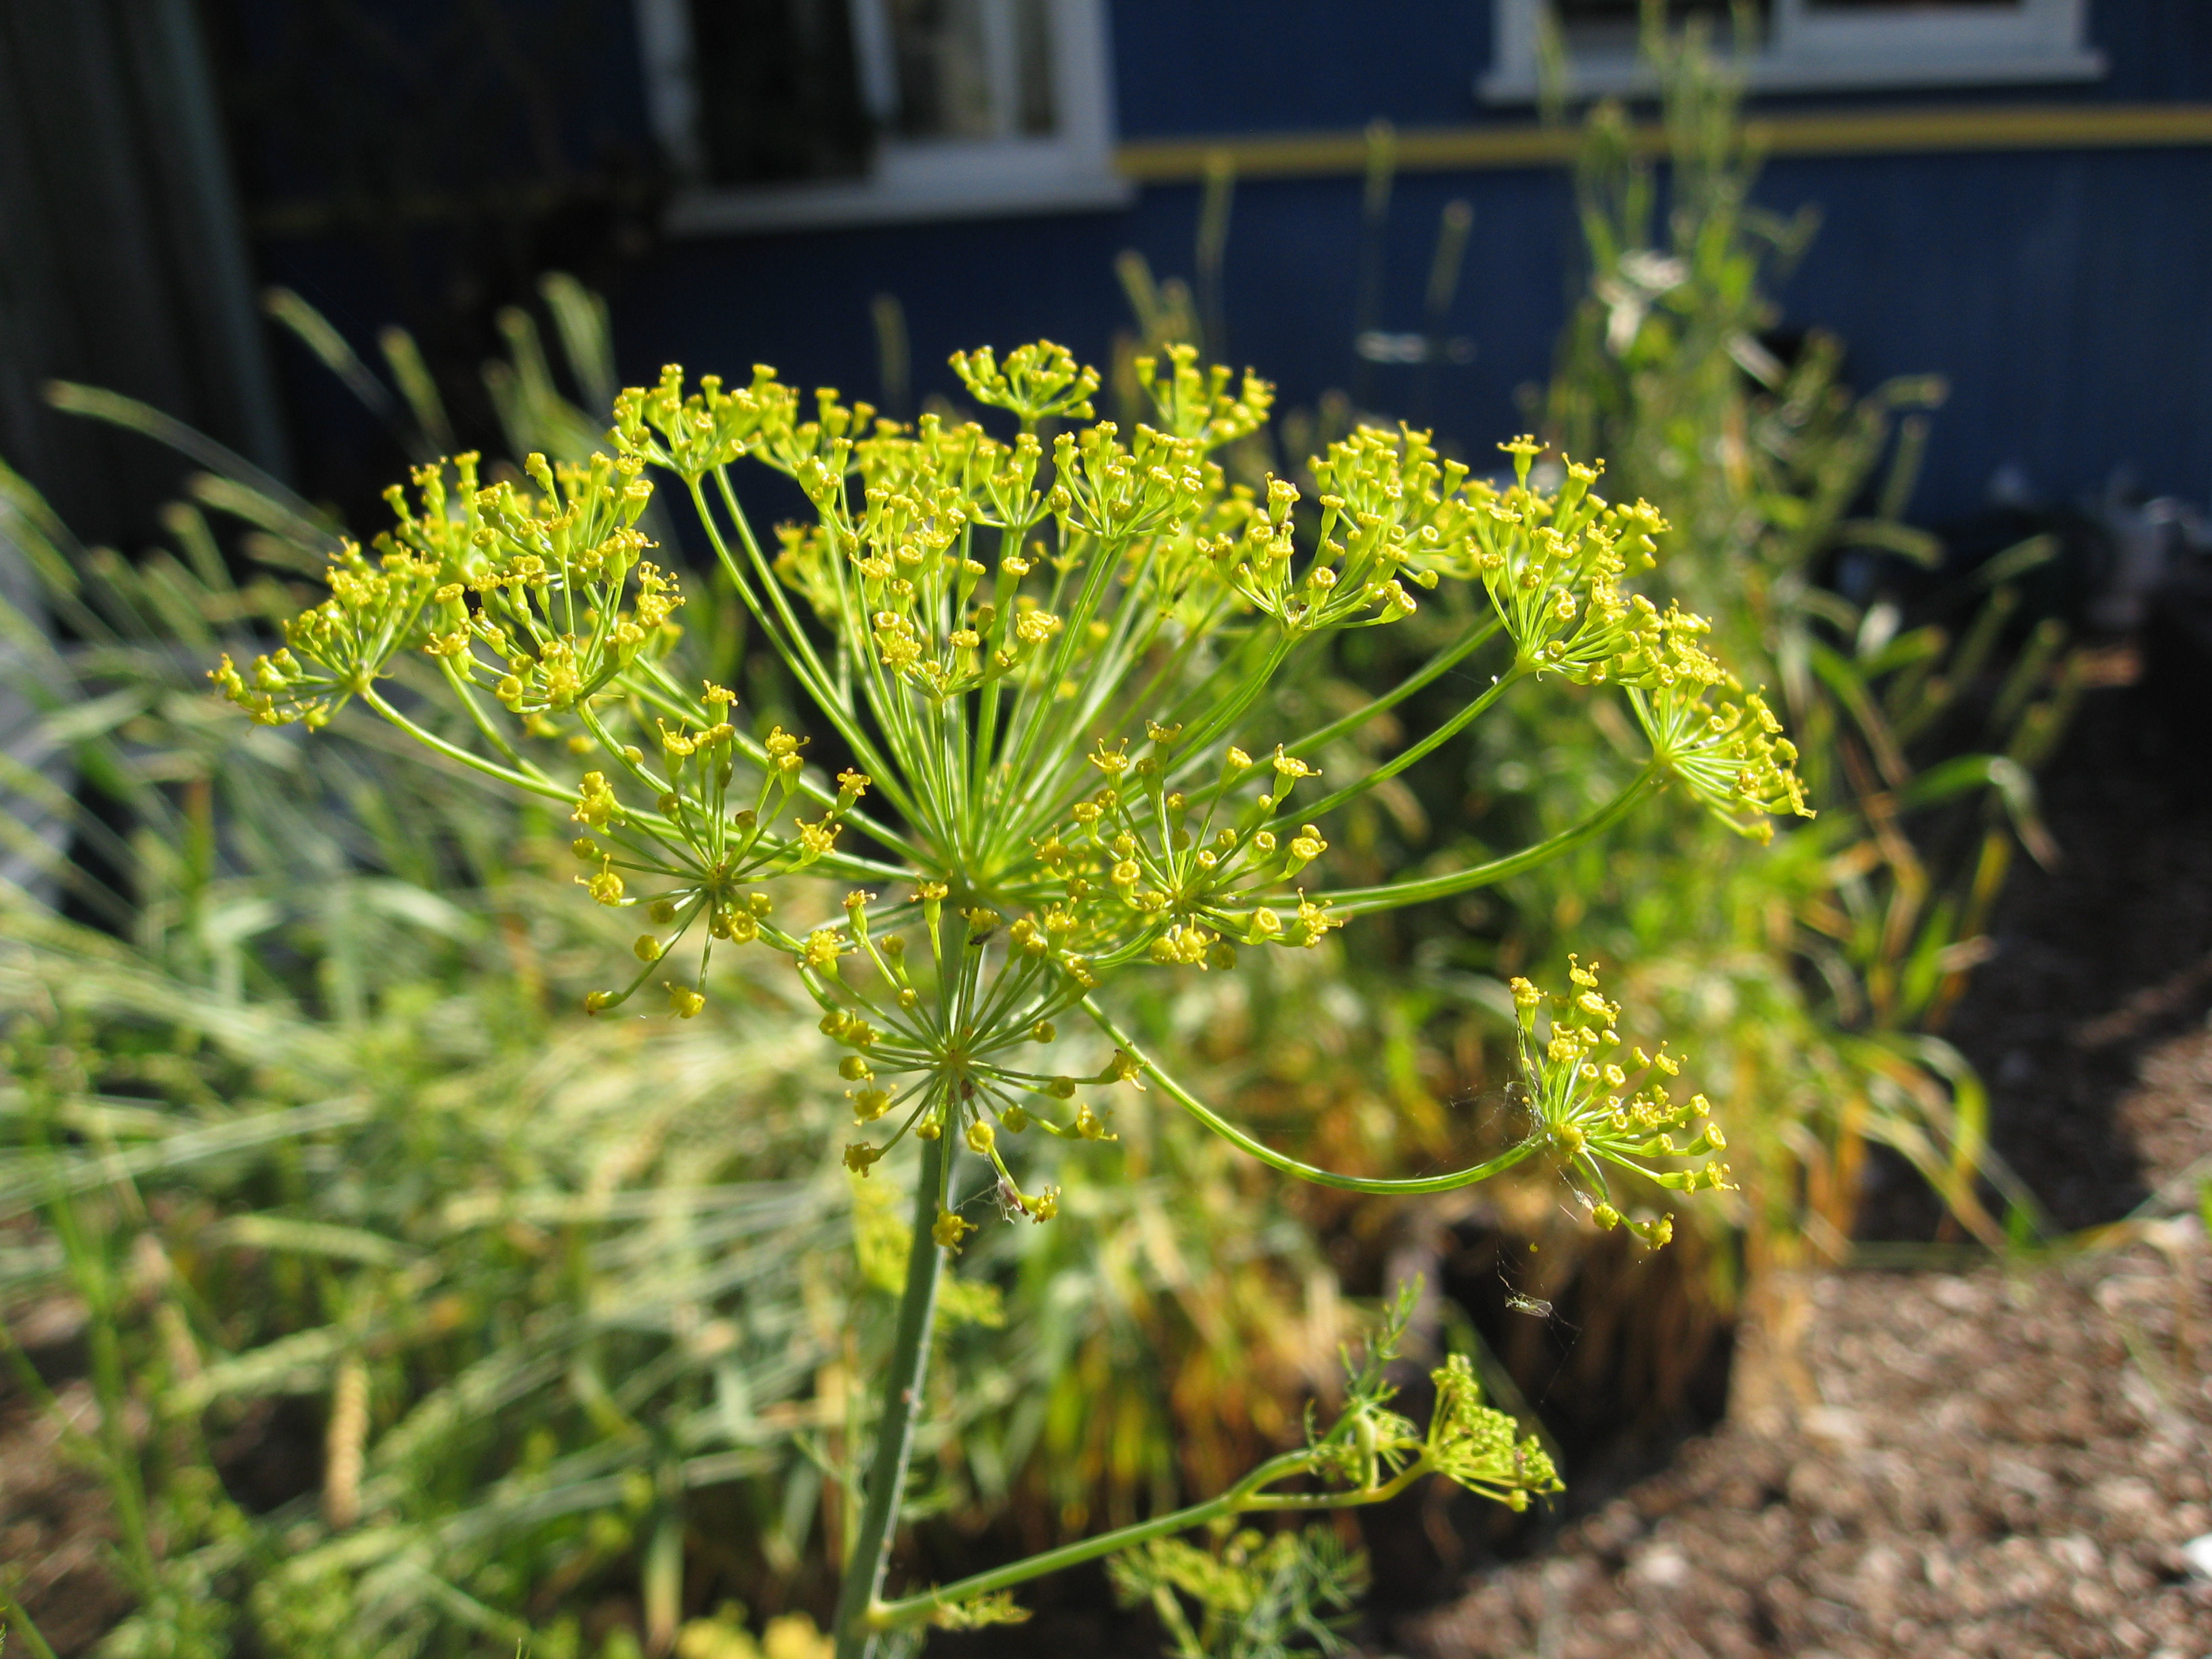 Dill going to seed. These umbels attract beneficial insects to the garden. 